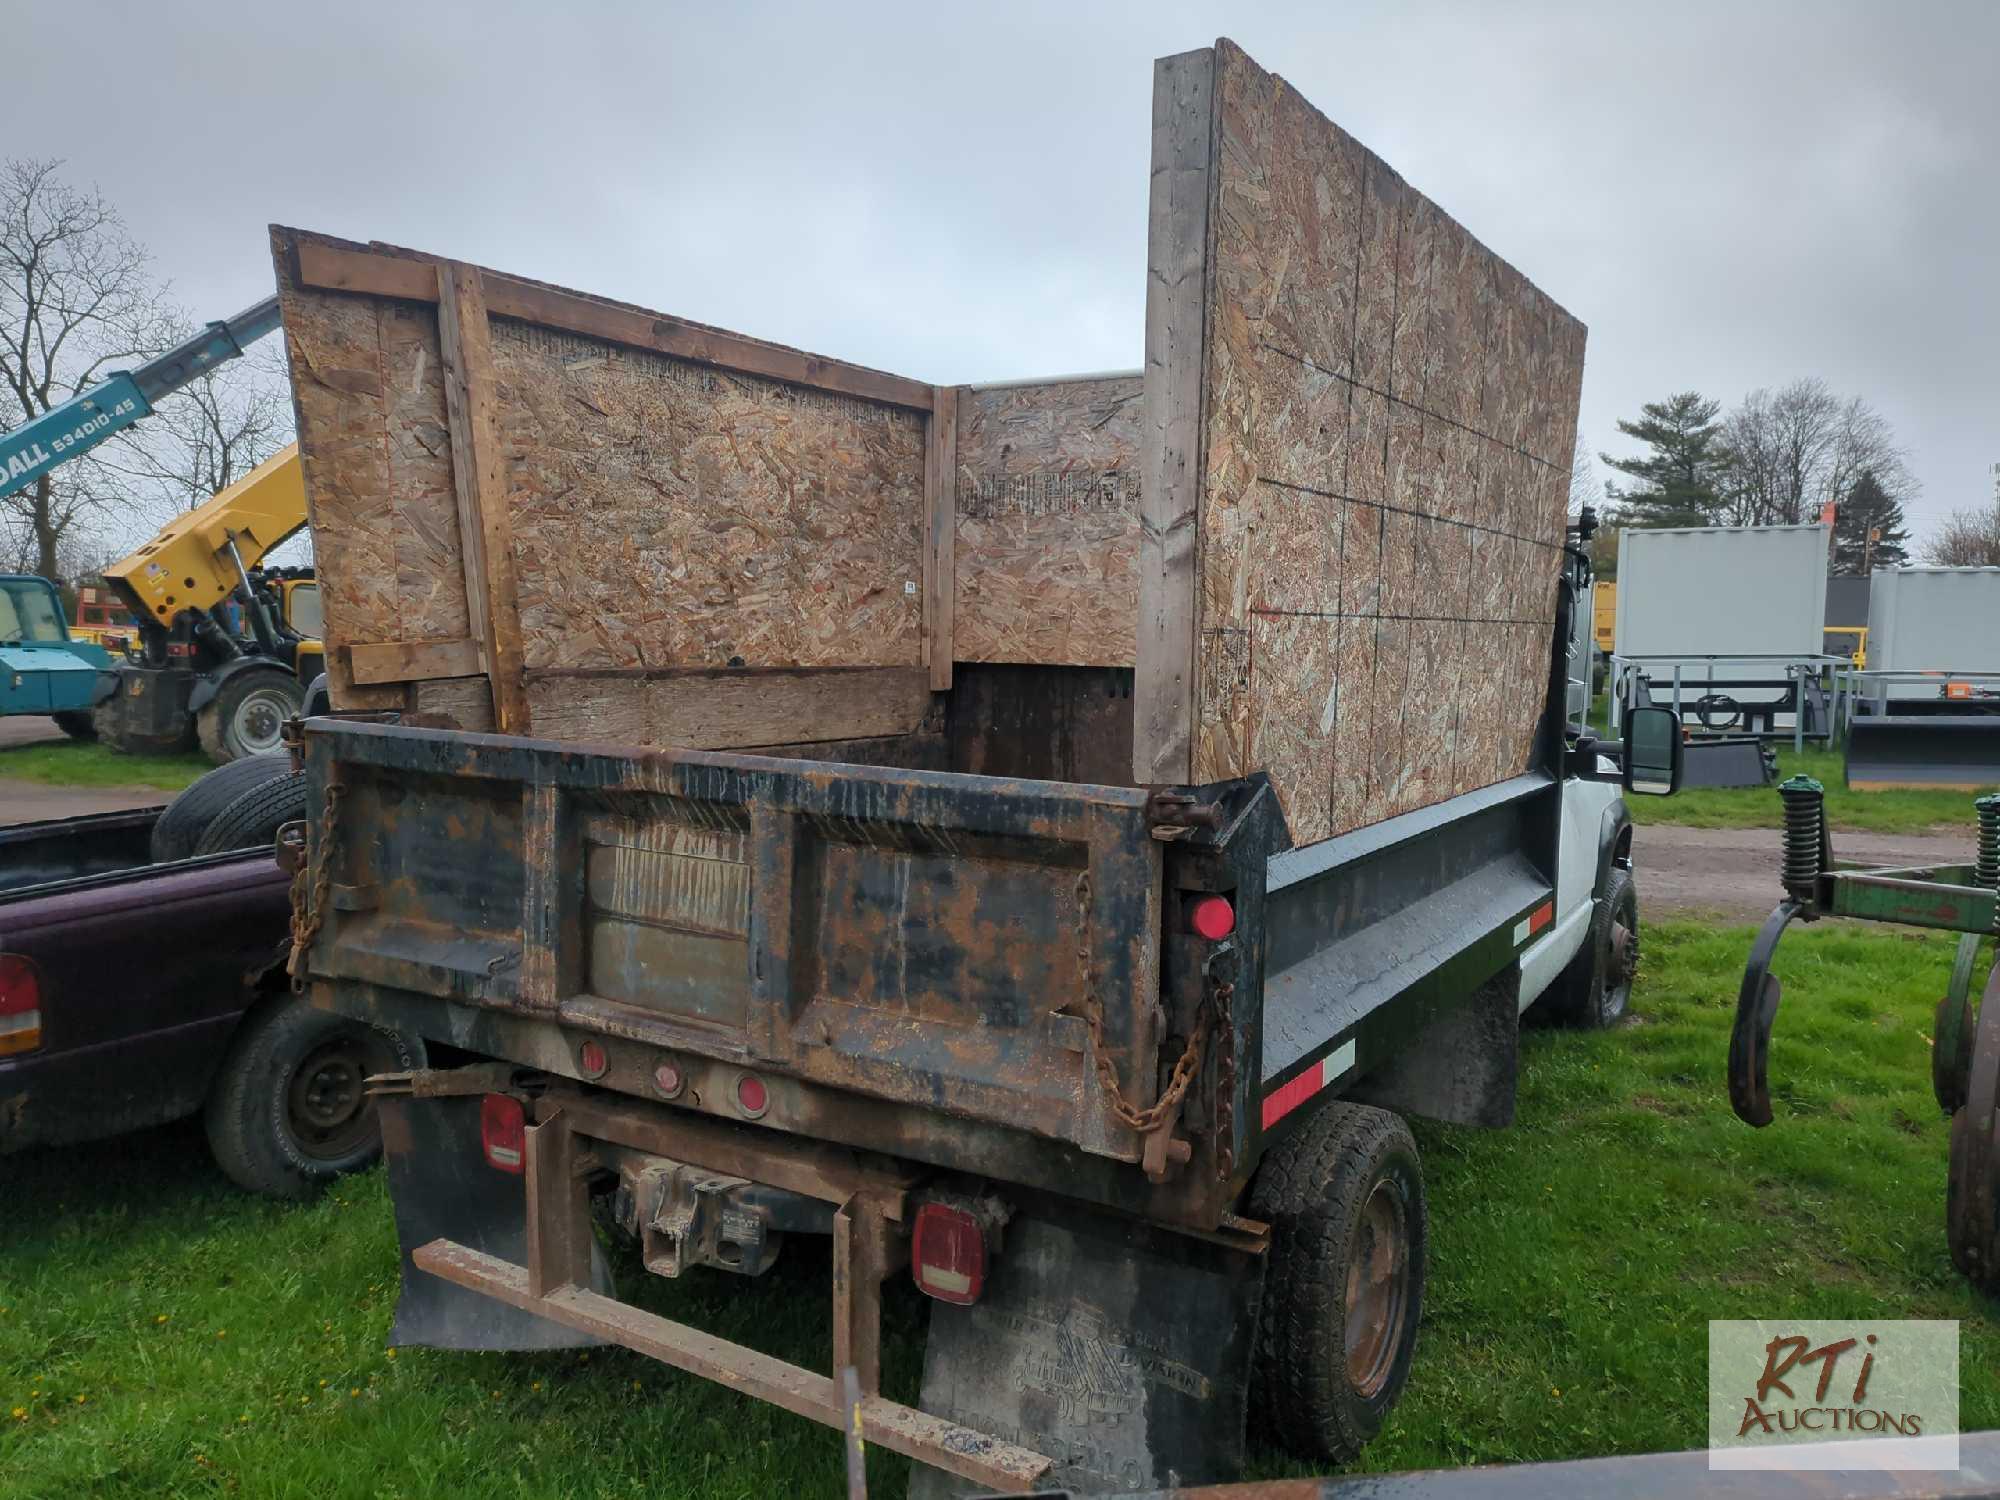 1999 Chevy 3500 1-ton dump, 8ft steel body, 4WD, 67,746 miles showing, emergency brake doesn't work,